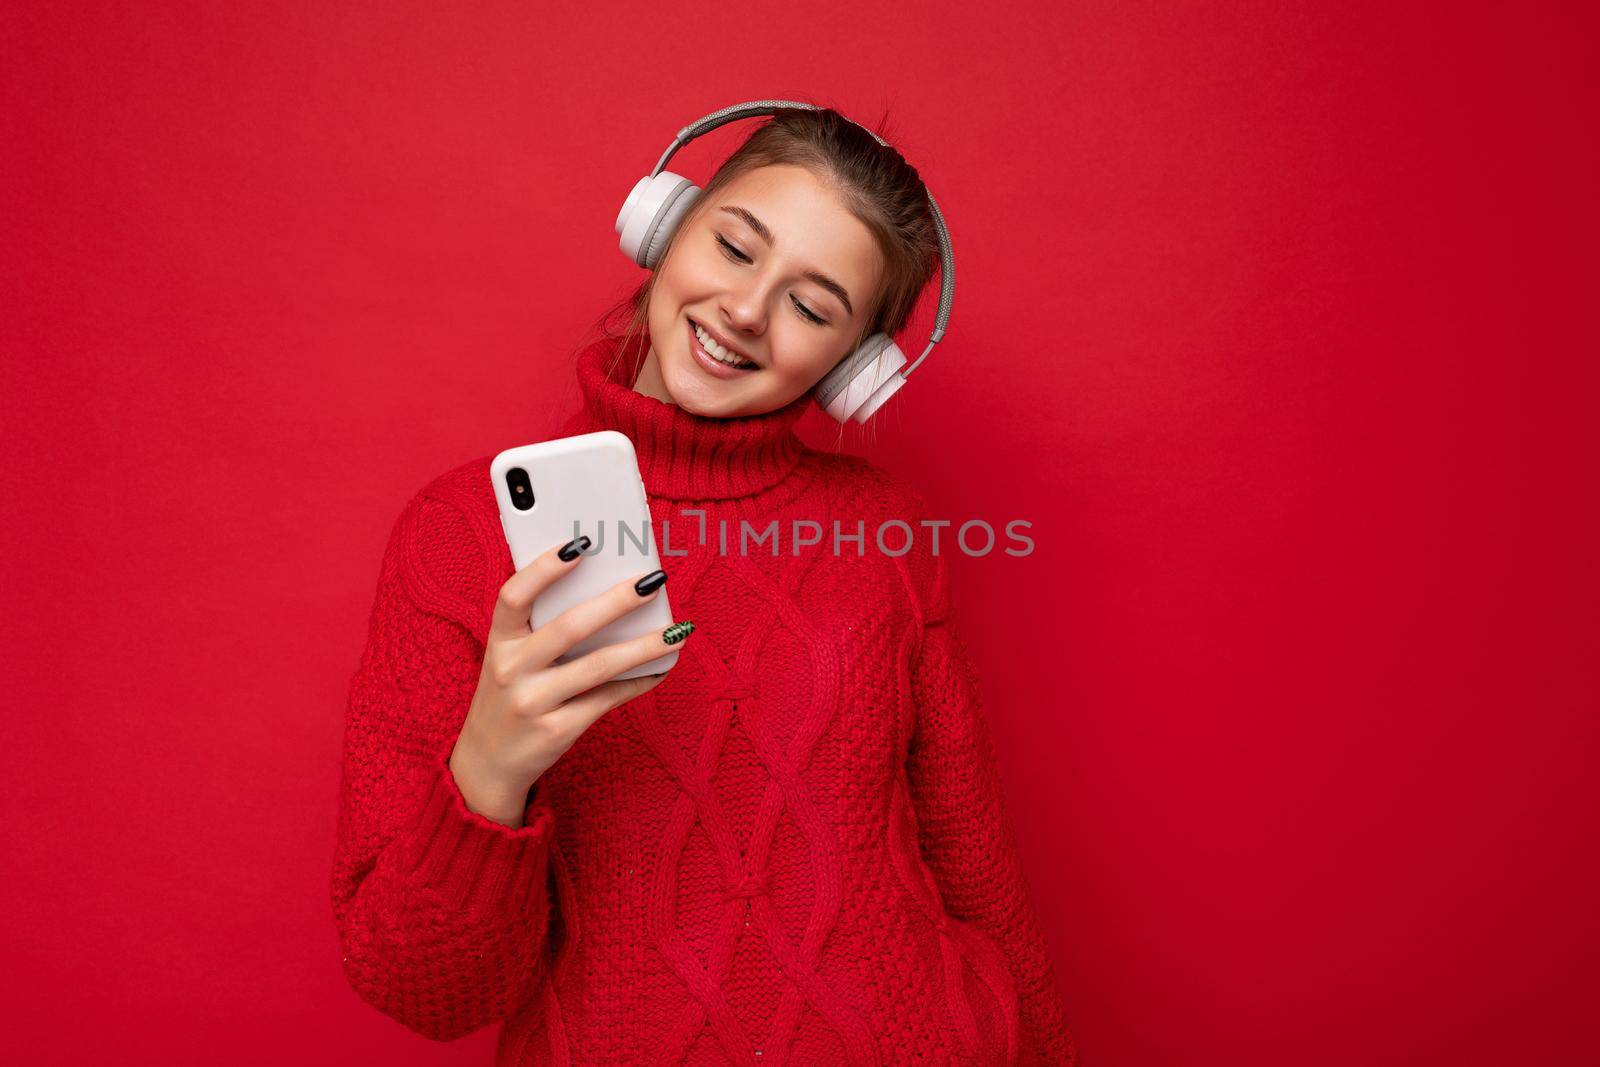 Photo shot of beautiful joyful smiling young female person wearing stylish casual outfit isolated over colorful background wall wearing white bluetooth wireless earphones and listening to music and using mobile phone looking at gadjet display.